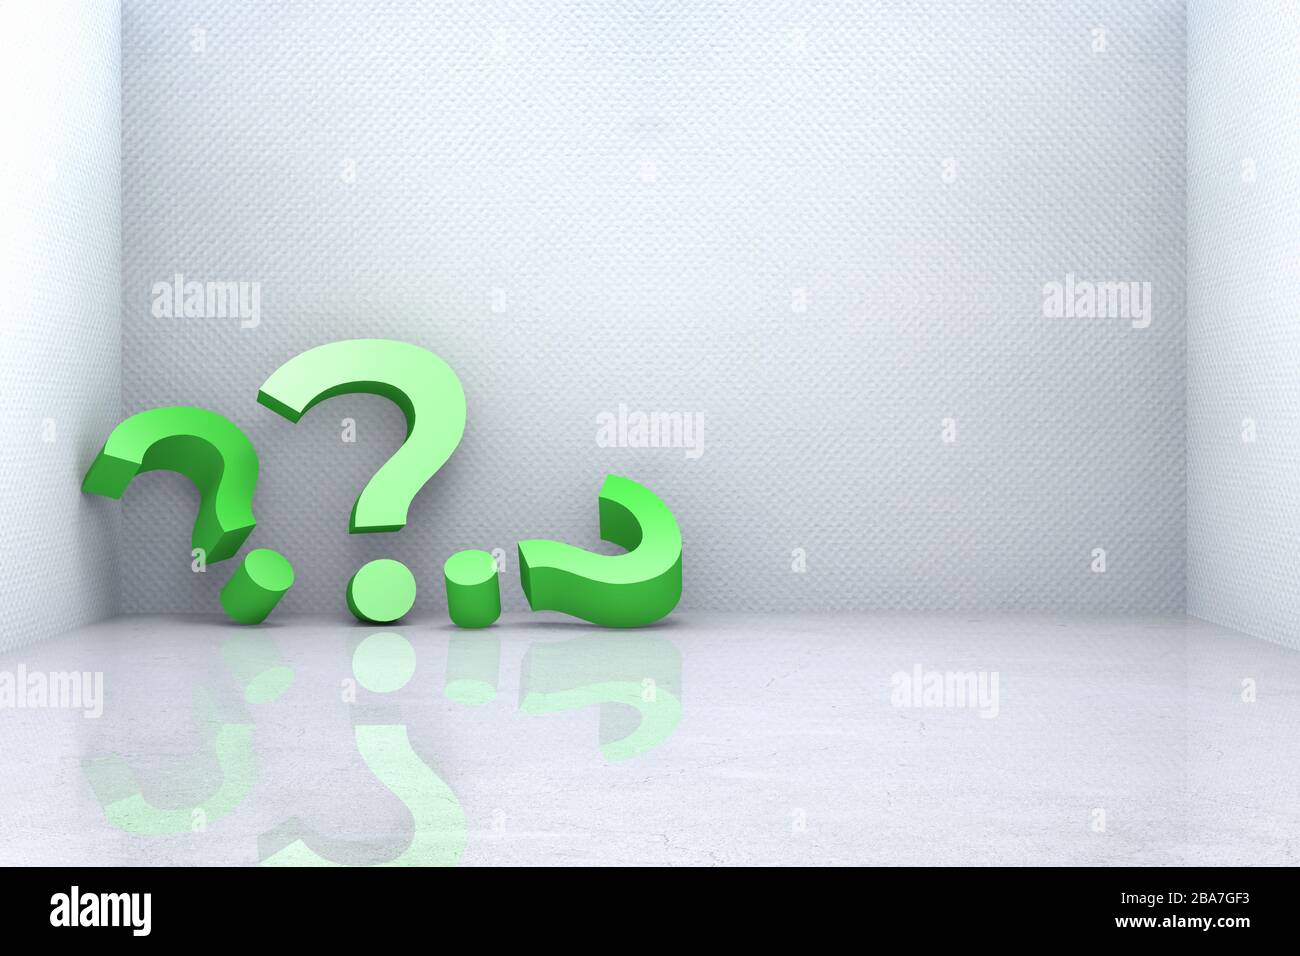 Green Question Mark on white room Background. 3D Render. Stock Photo